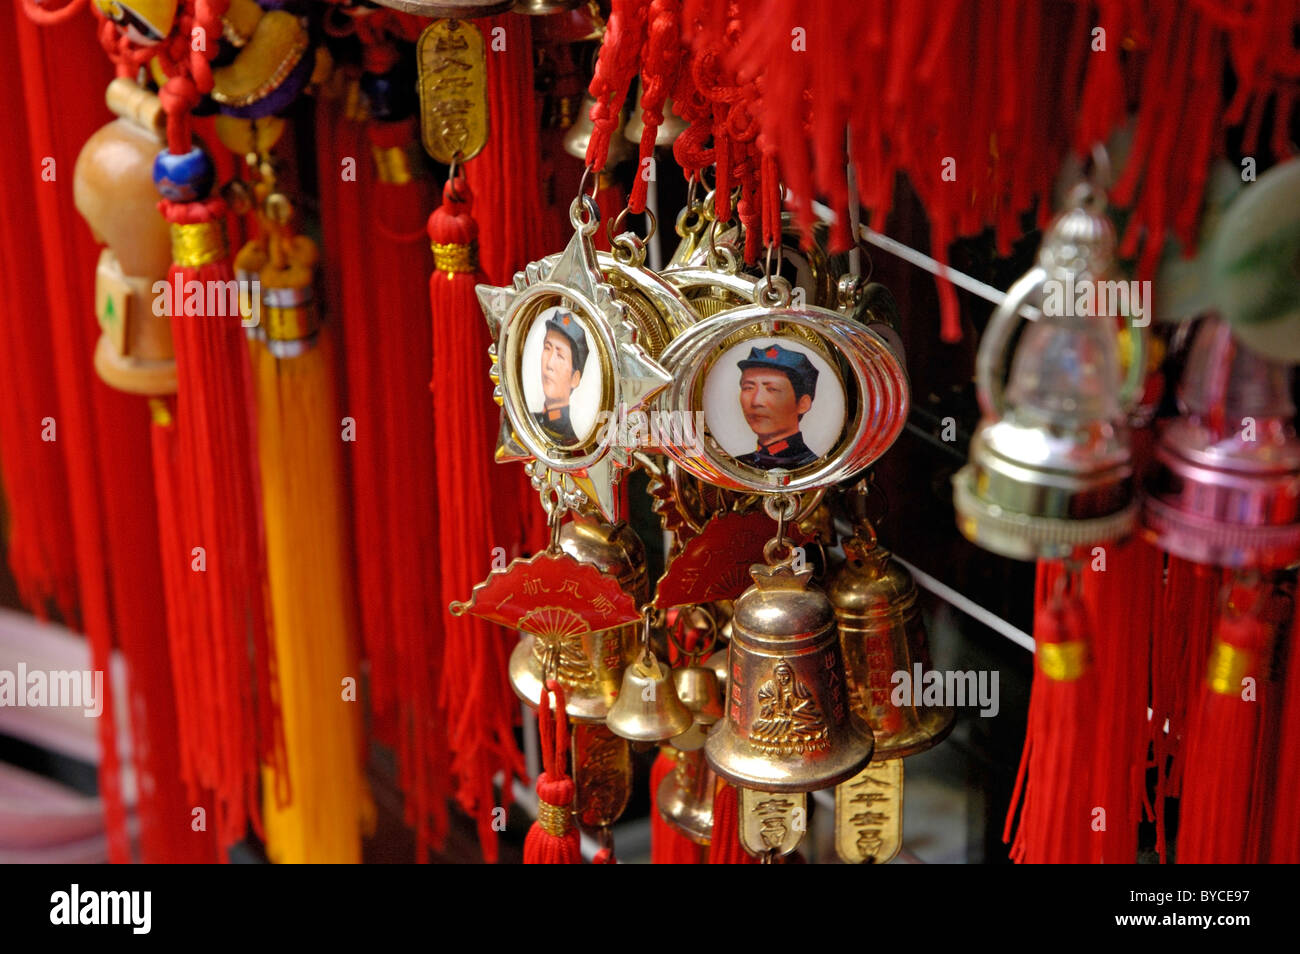 Souvenirs Chia - Mao Zedong / Mao Tse-tung medals hanging in a souvenir stall outside Behai Park, Beijing, China. Stock Photo